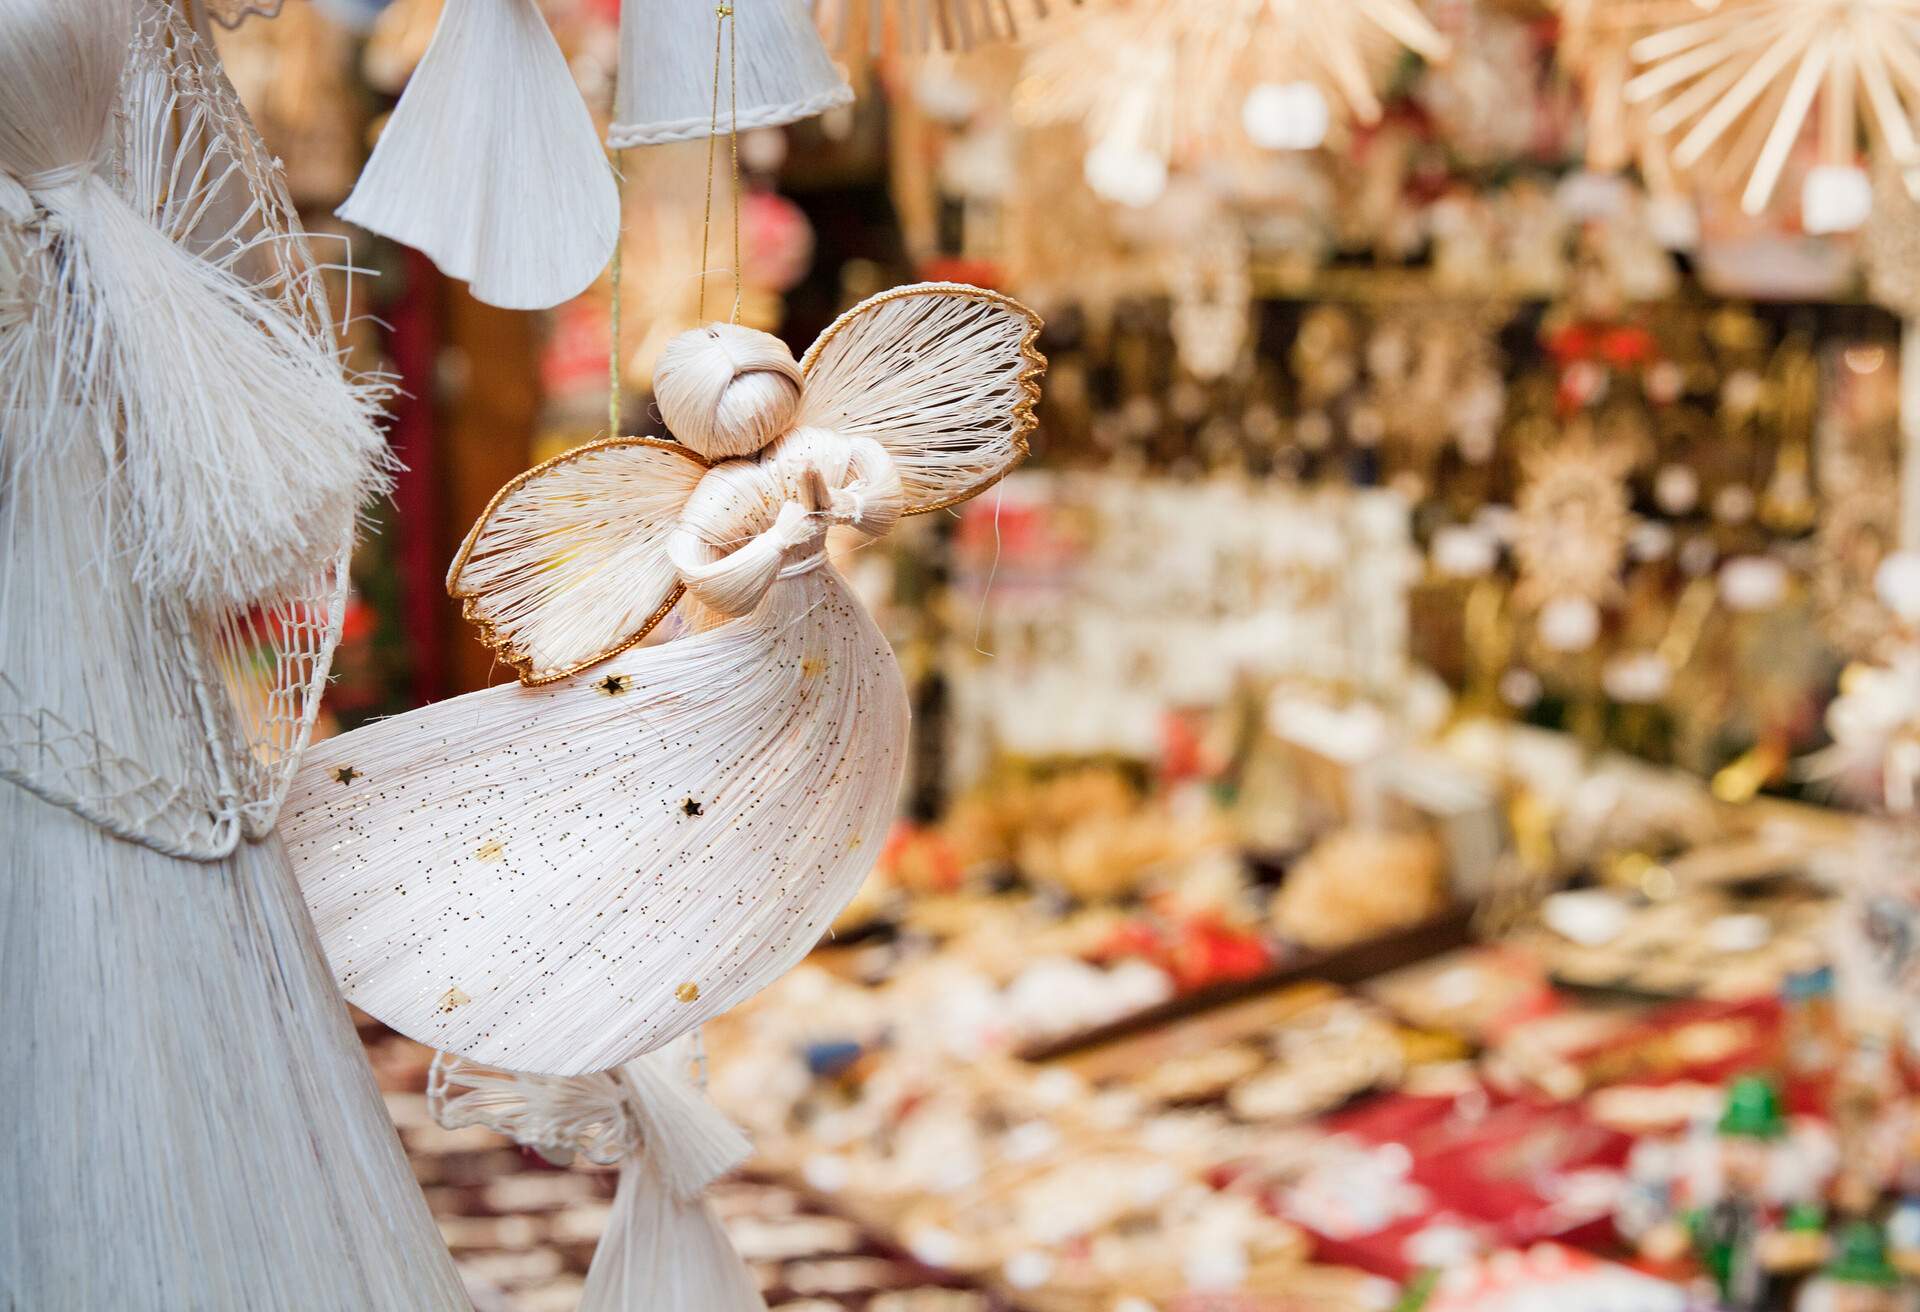 A hanging little angel souvenir decorated with glitter and little stars in the blurry background.